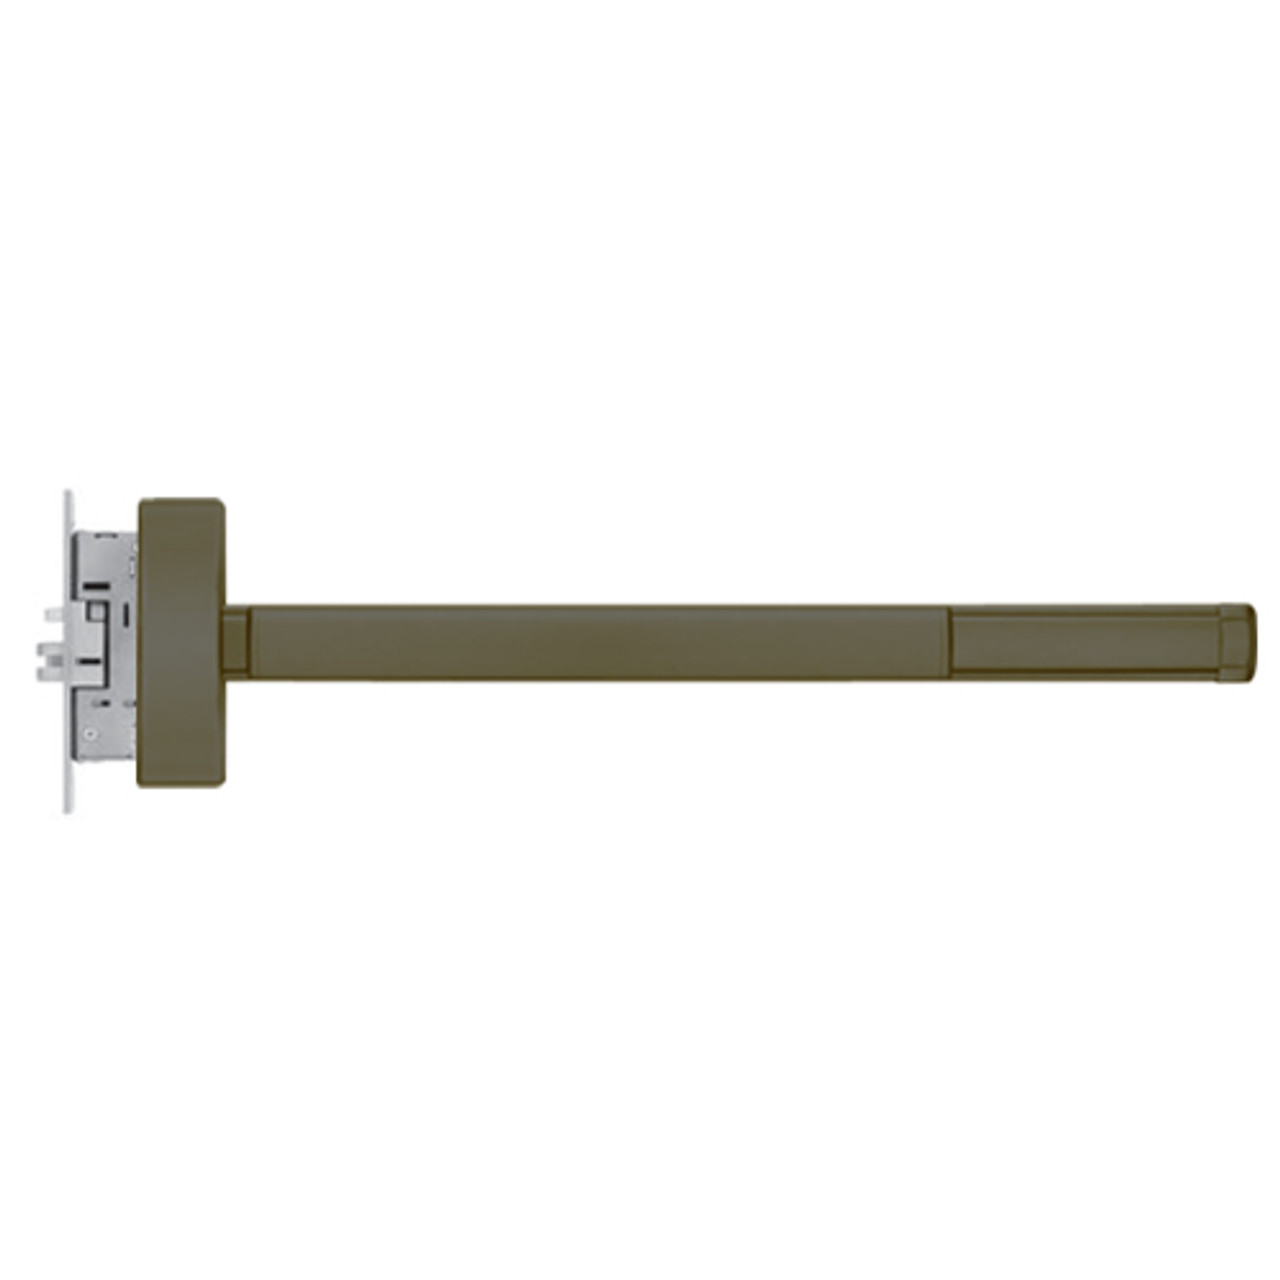 TSFL2303-LHR-613-48 PHI 2300 Series Fire Rated Apex Mortise Exit Device with Touchbar Monitoring Switch Prepped for Key Retracts Latchbolt in Oil Rubbed Bronze Finish